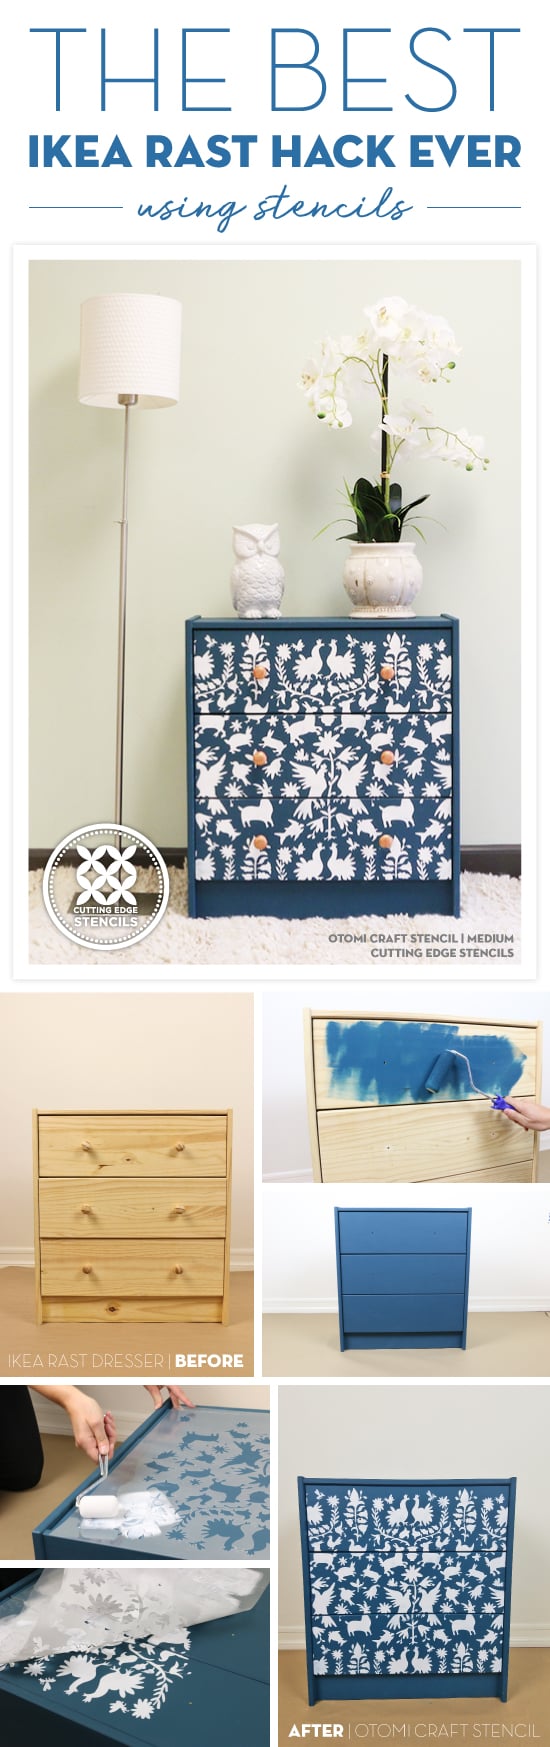 Cutting Edge Stencils shares how to personalize a $35 Ikea RAST using our Otomi Craft Stencil and Benjamin Moore paint. http://www.cuttingedgestencils.com/otomi-pattern-craft-stencil-DIY-home-decor-project.html